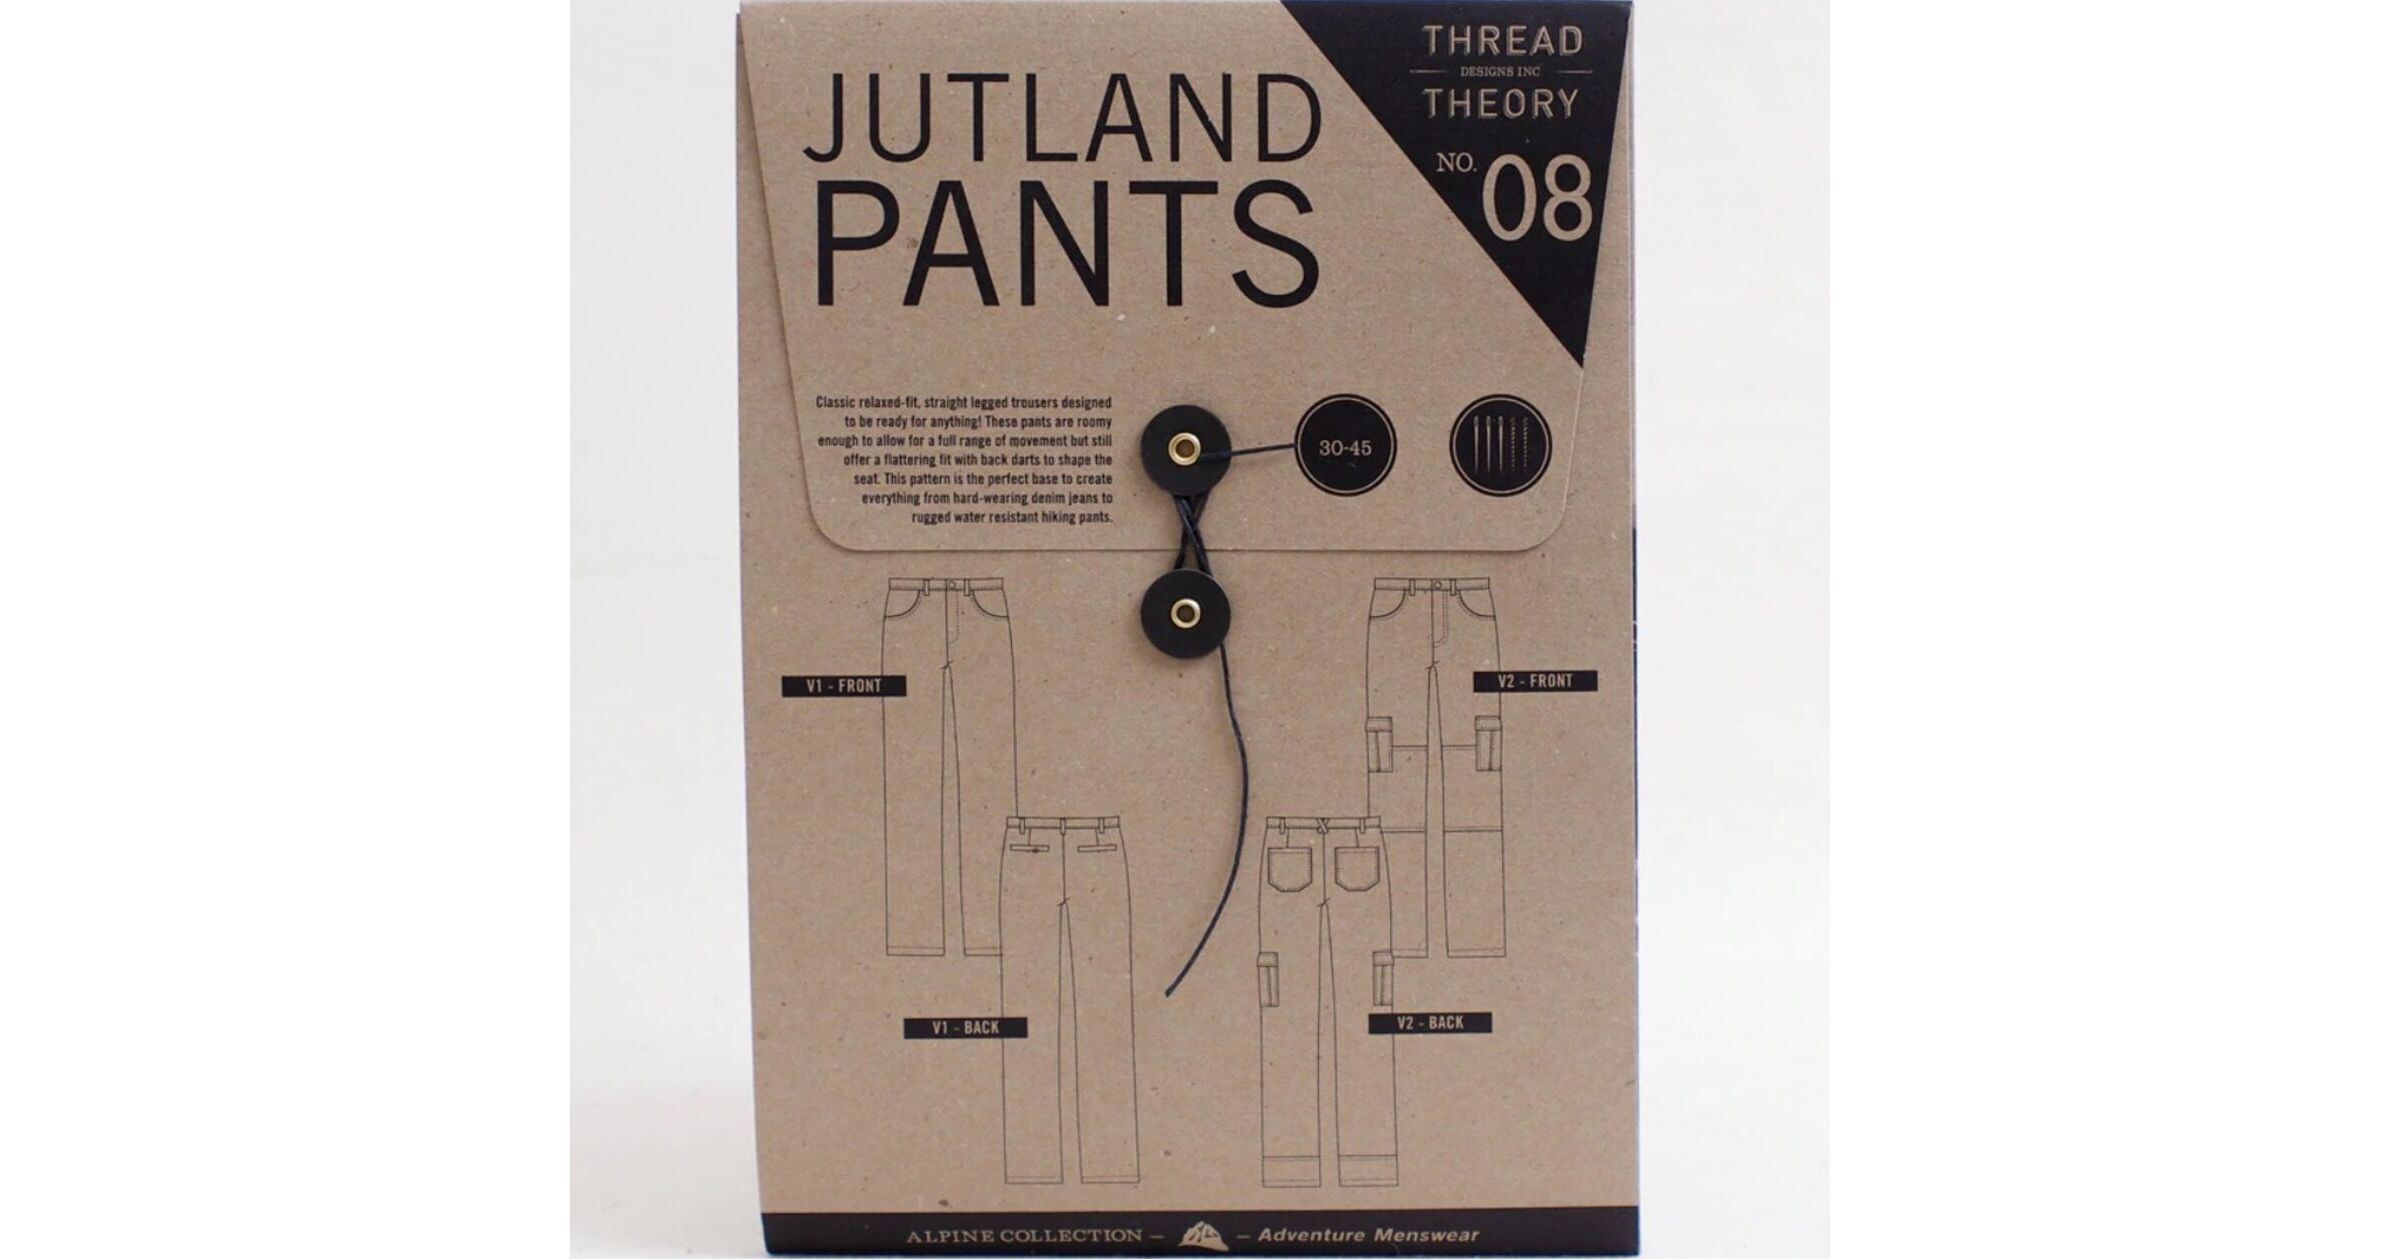 https://www.croftmill.co.uk/images/pictures/00-2023/patterns-2023/jutland_pants_pattern_thread_theory_designs_cover-(1200x630-ffffff).jpg?v=6bc5d75c